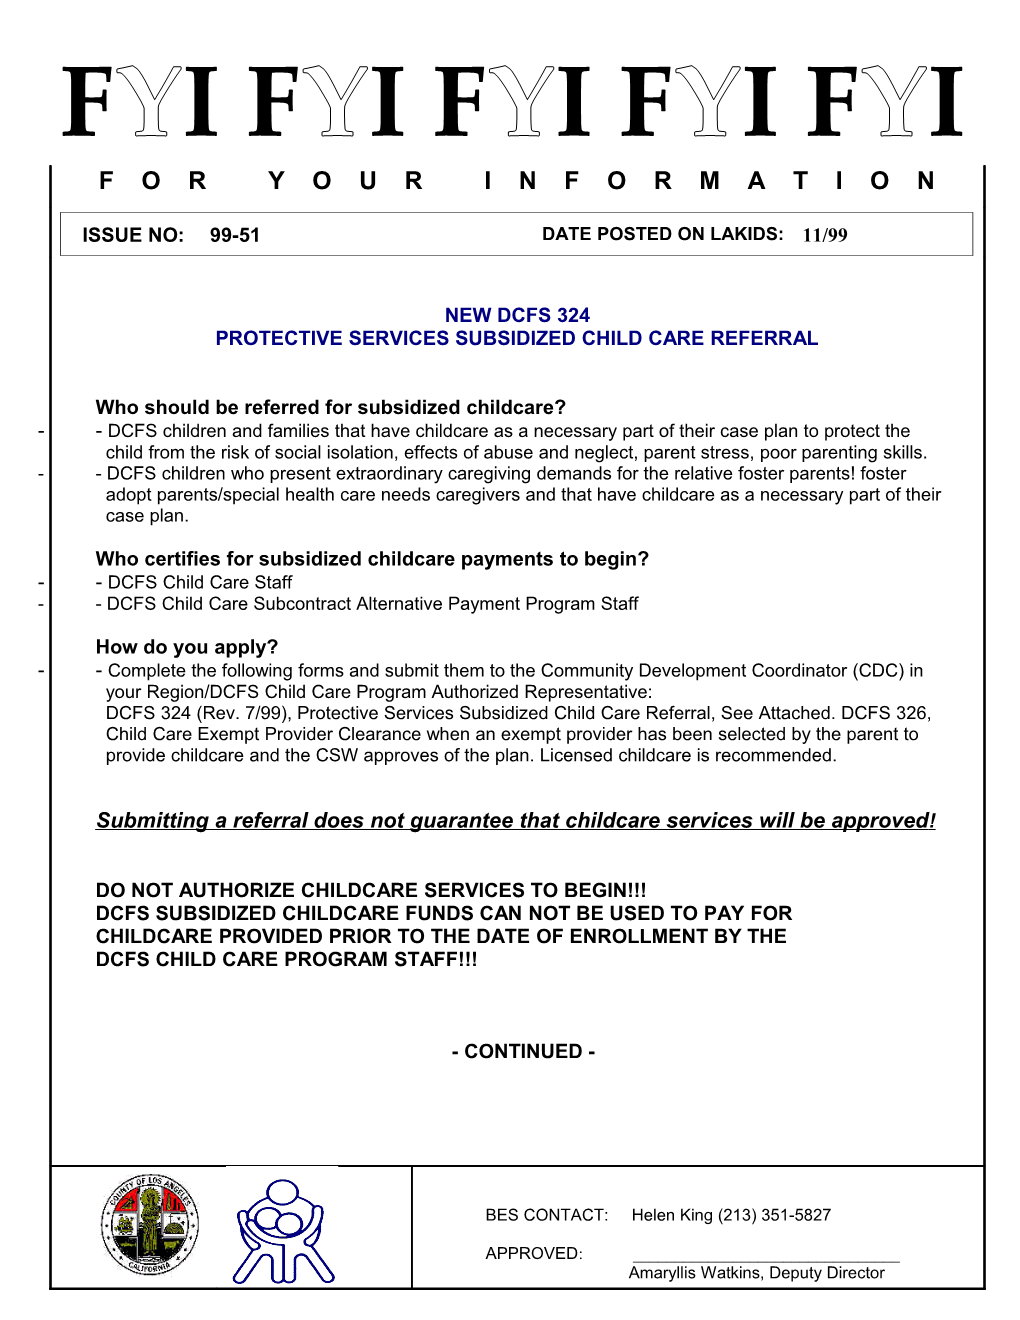 New DCFS 324 - Protective Services Subsidized Child Care Referral